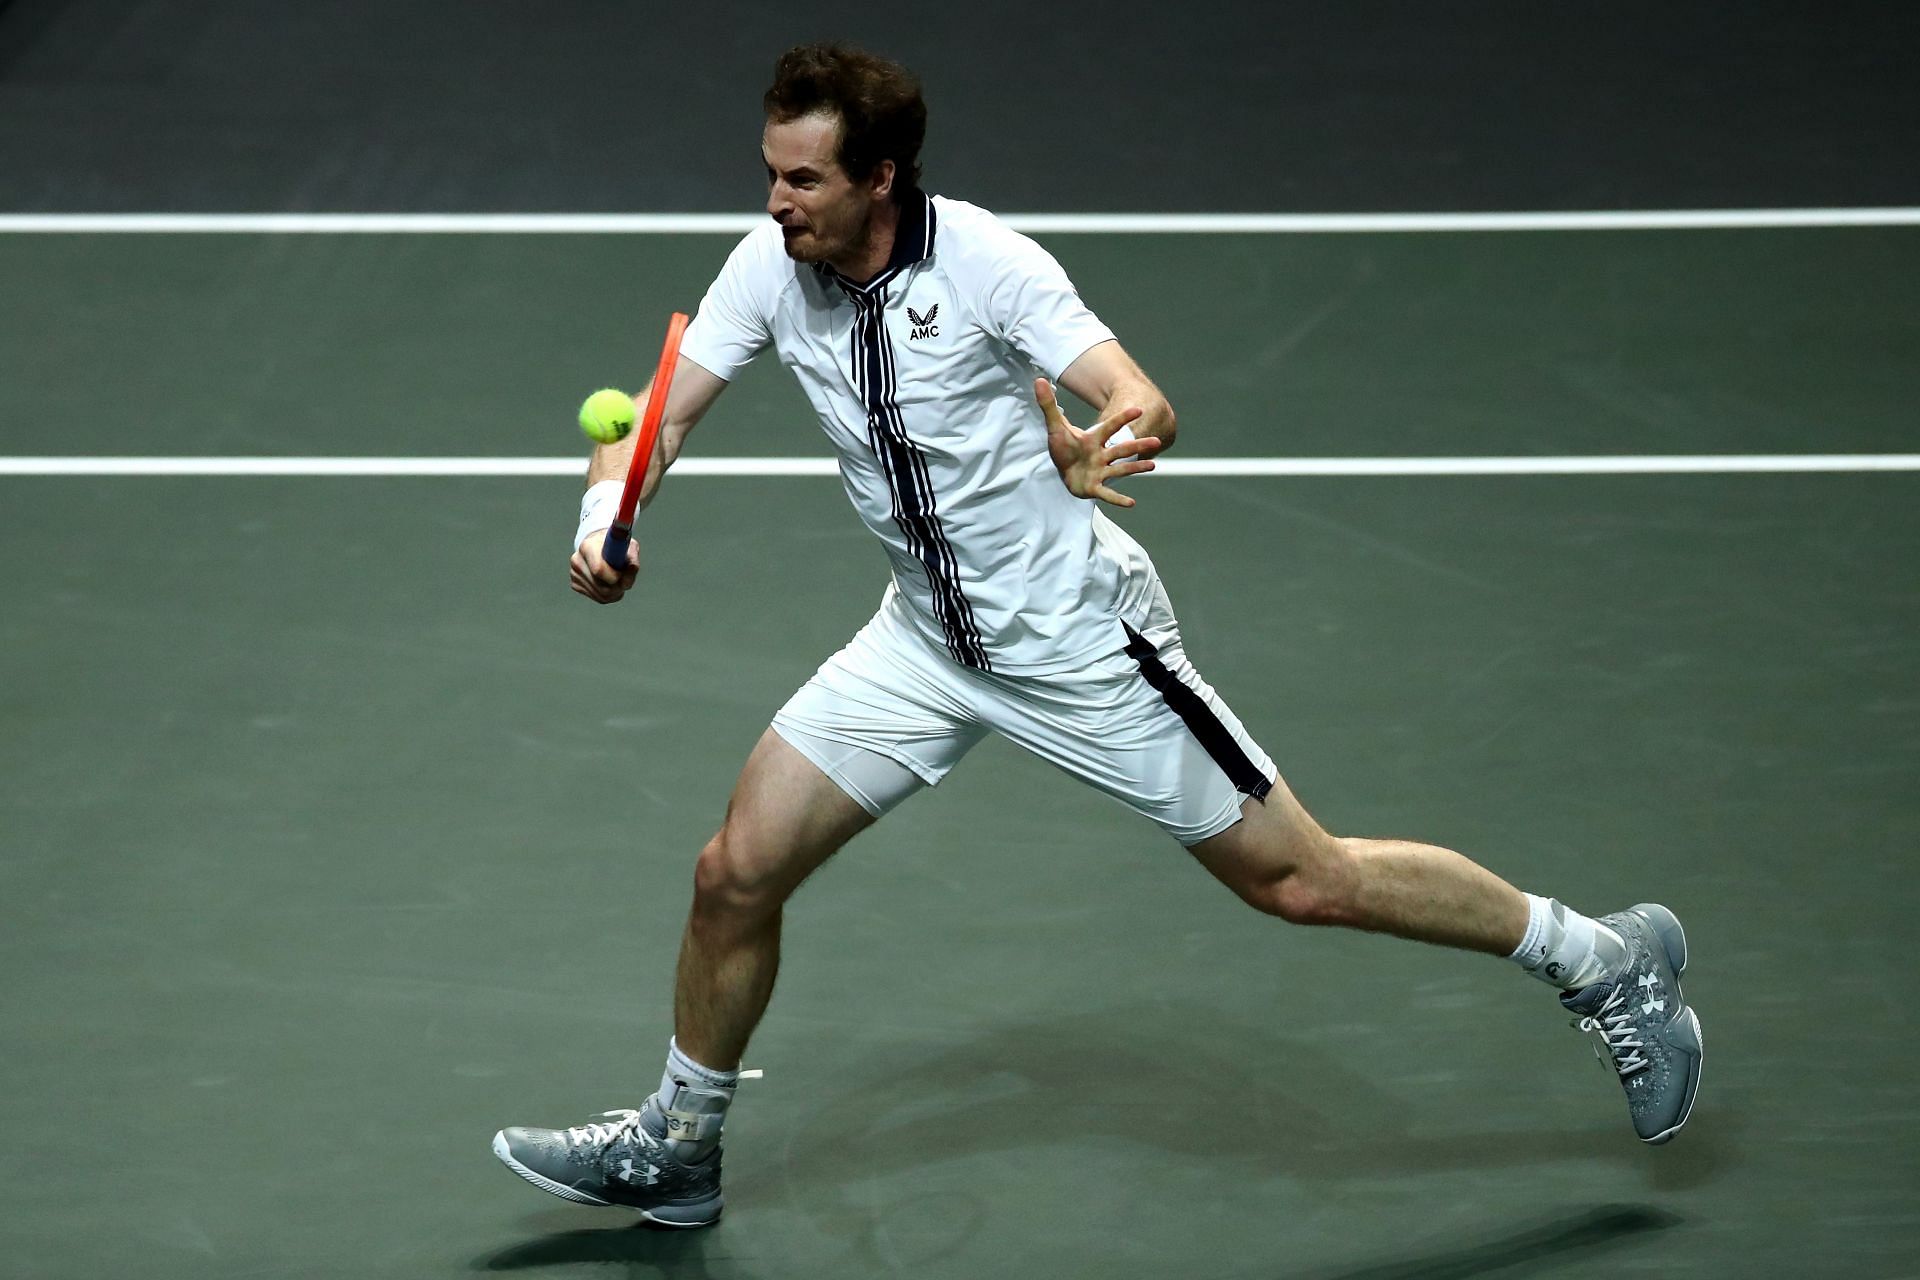 Murray takes on Rublev in the final